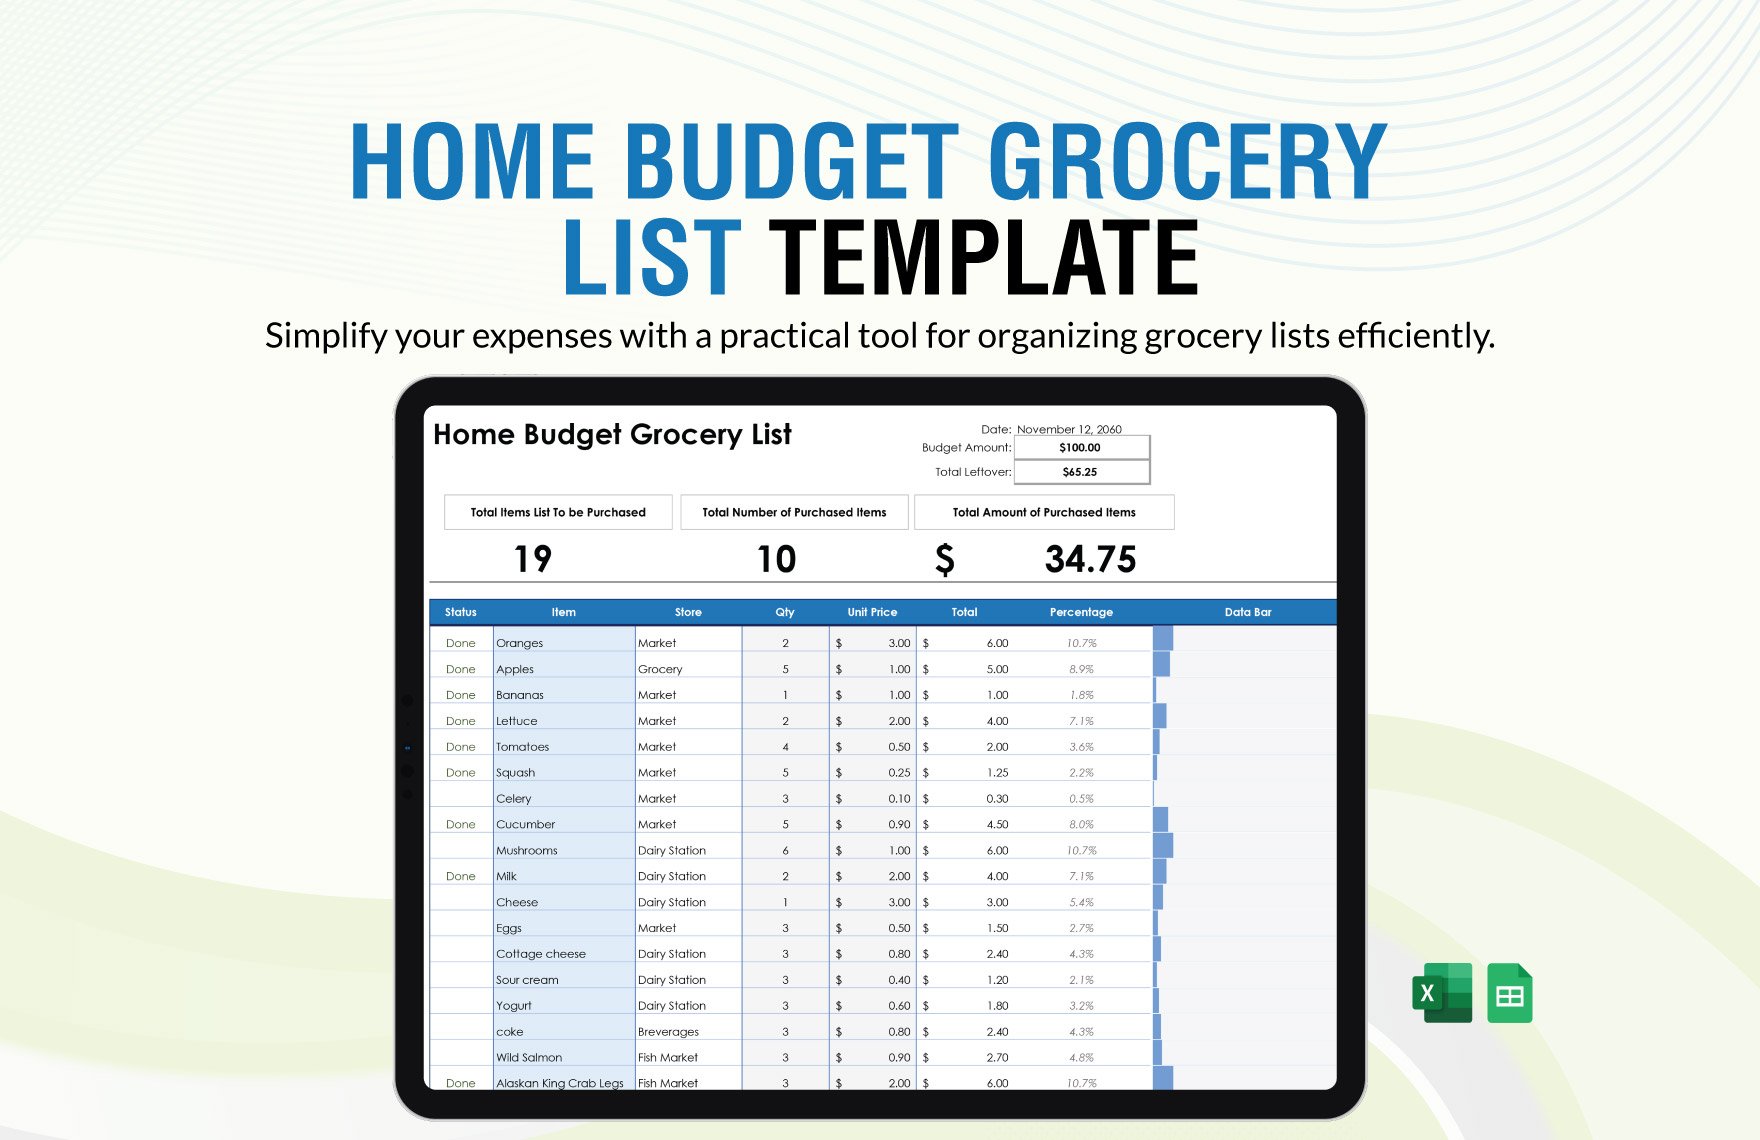 Free Home Budget Grocery List in Excel, Google Sheets